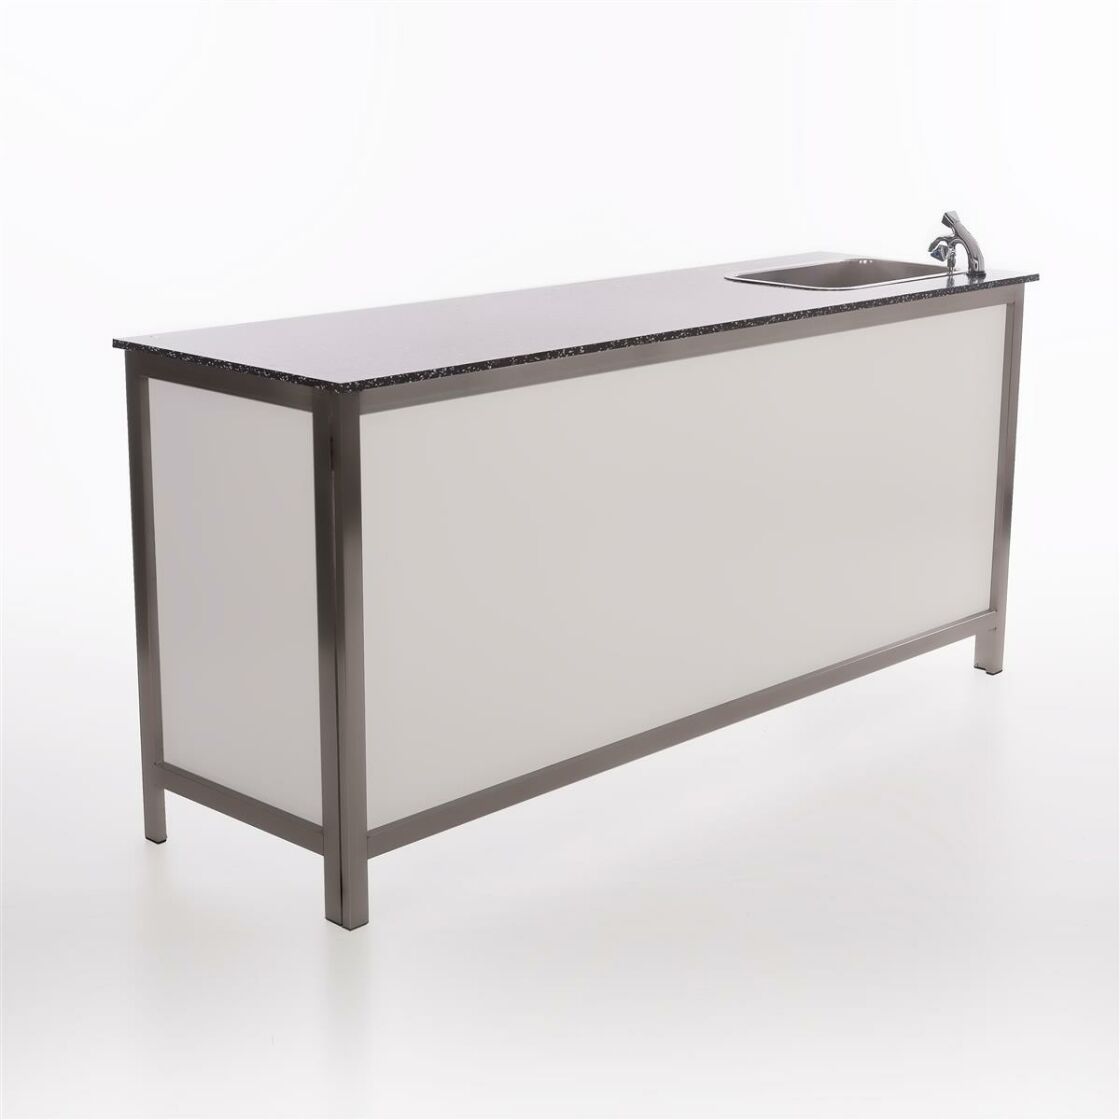 Folding Counter Made Of Stainless Steel With Pe Surface~5 